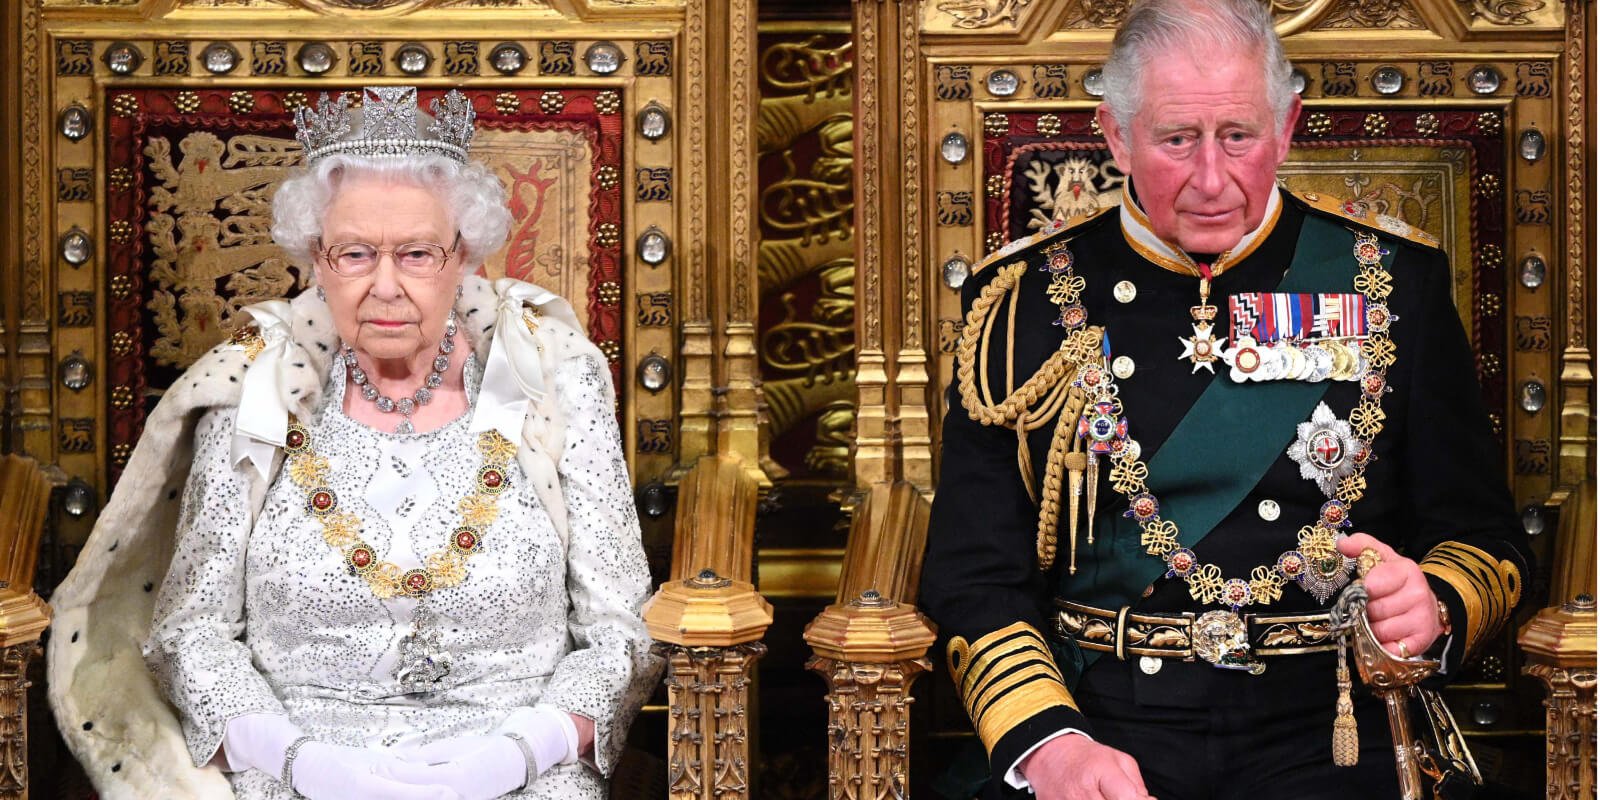 Queen Elizabeth and King Charles at the State Opening of Parliament at the Palace of Westminster on October 14, 2019 in London, England.